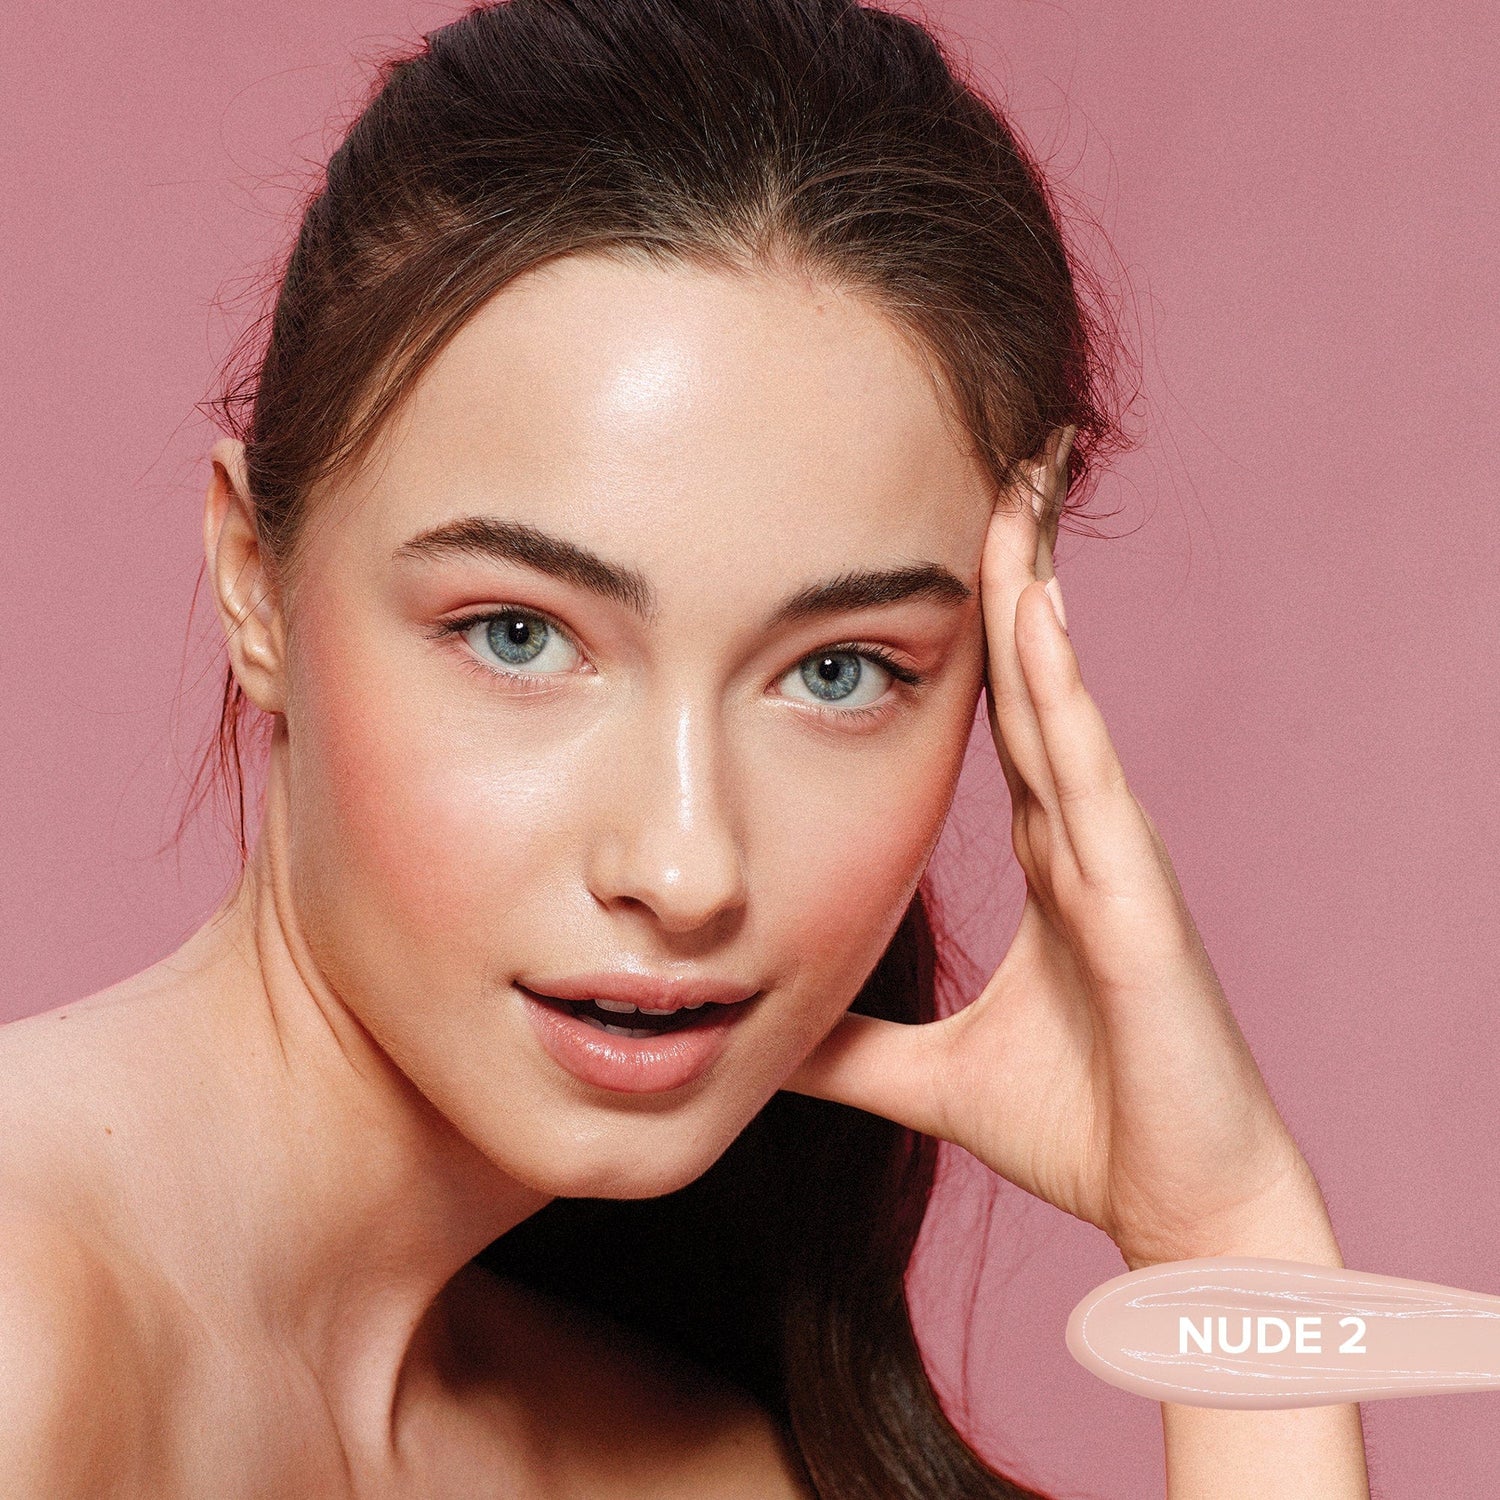 Light skinned young woman wearing Tinted Cover Liquid Foundation in shade Nude 2